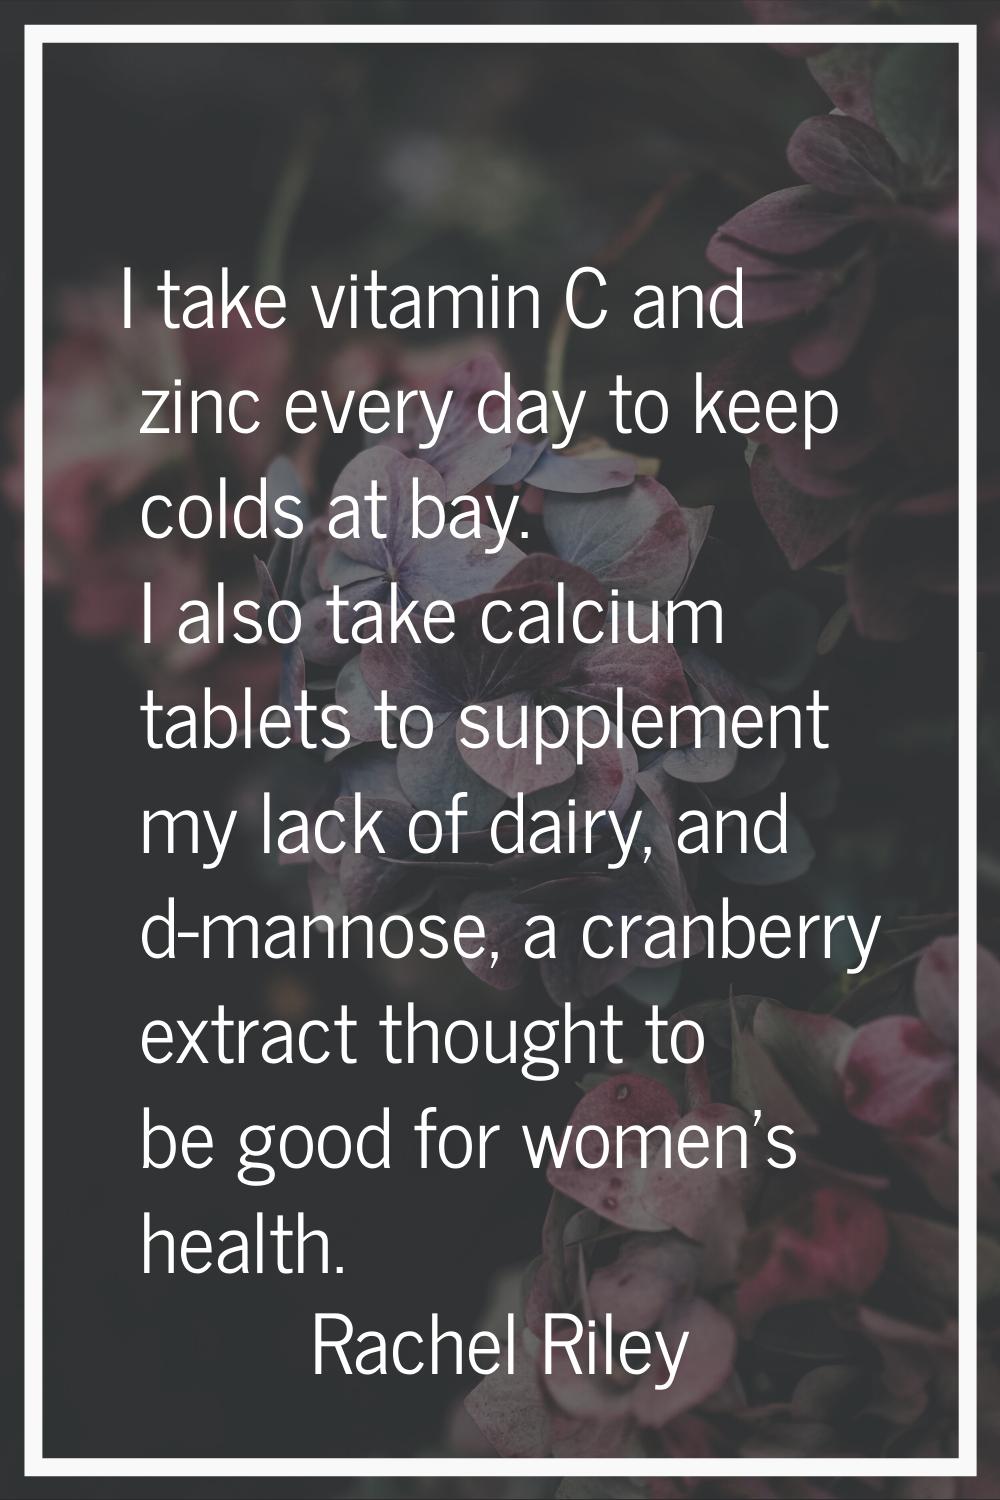 I take vitamin C and zinc every day to keep colds at bay. I also take calcium tablets to supplement